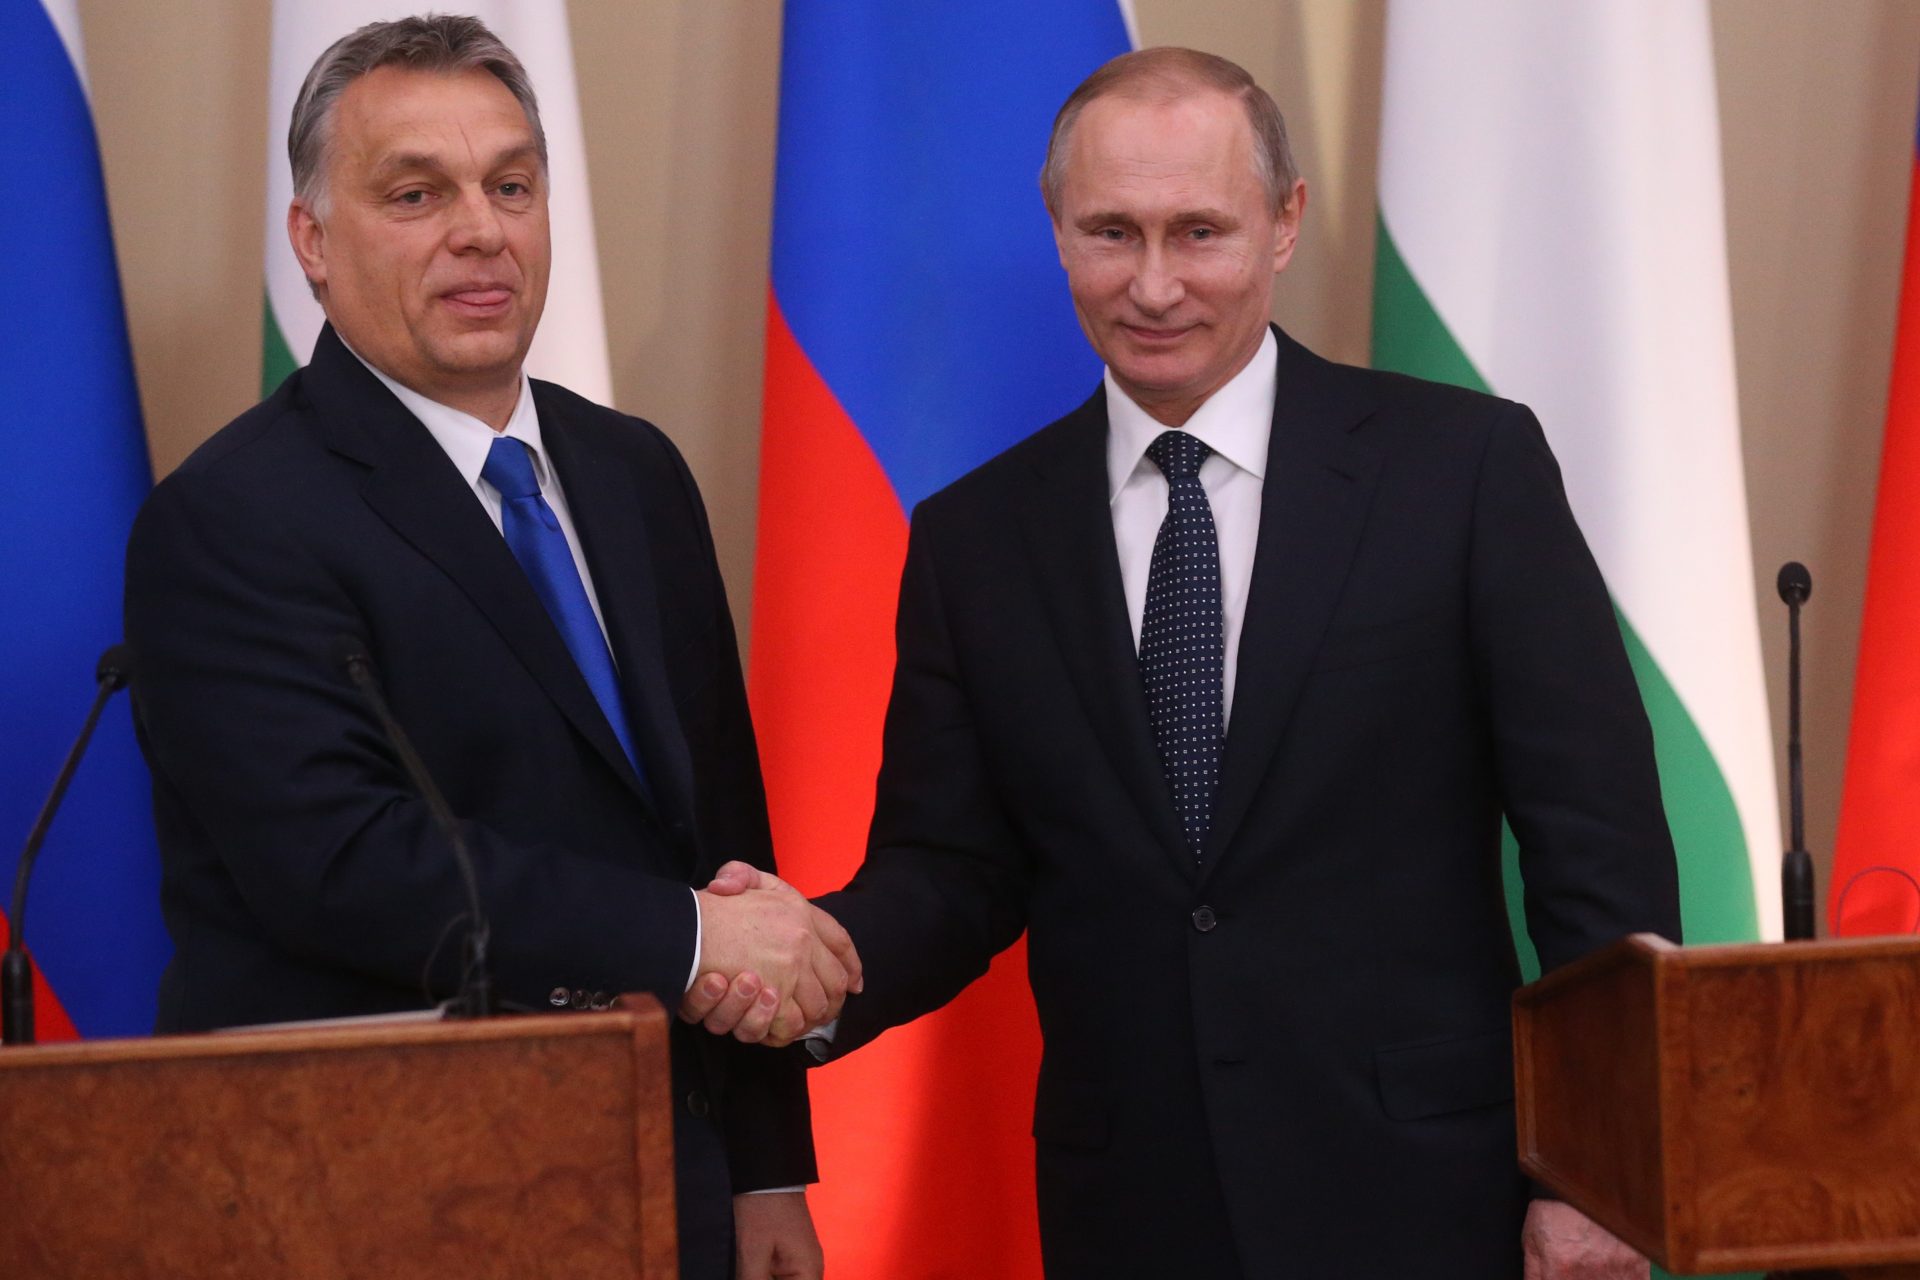 Why would Orbán support Putin?